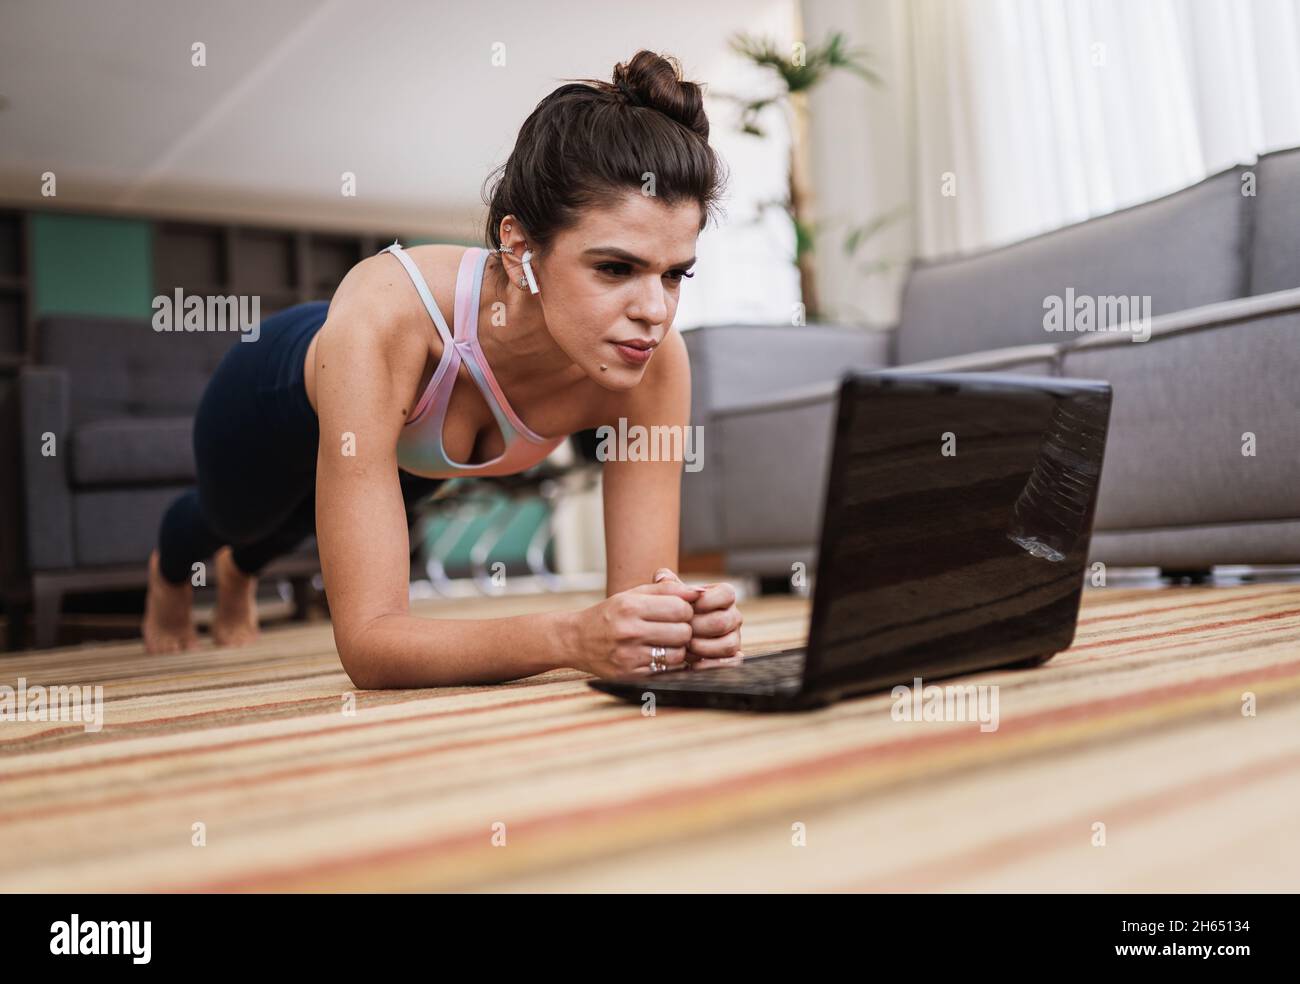 Attractive young Latin woman doing yoga stretching yoga online at home. Self-isolation is beneficial, entertainment and education on the Internet. Hea Stock Photo